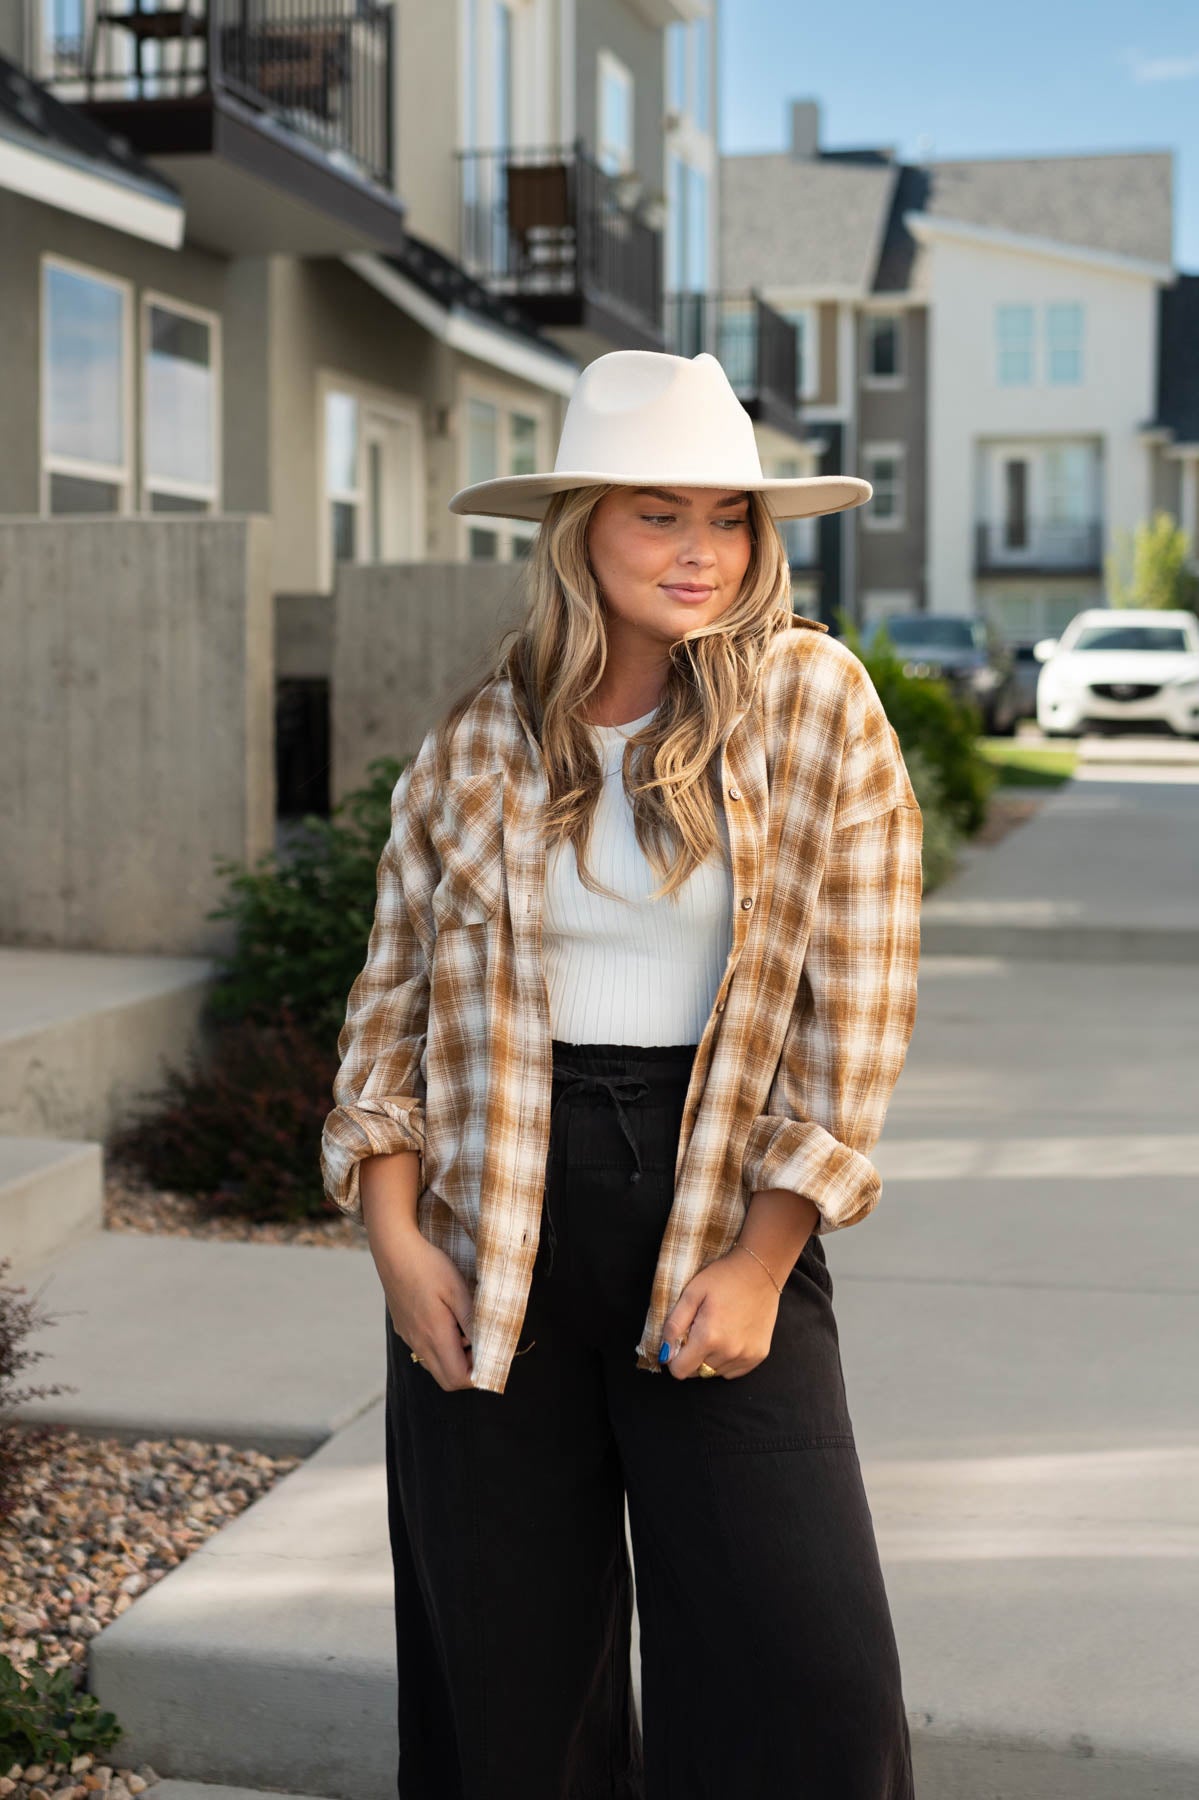 Long sleeve caramel plaid top that buttons up